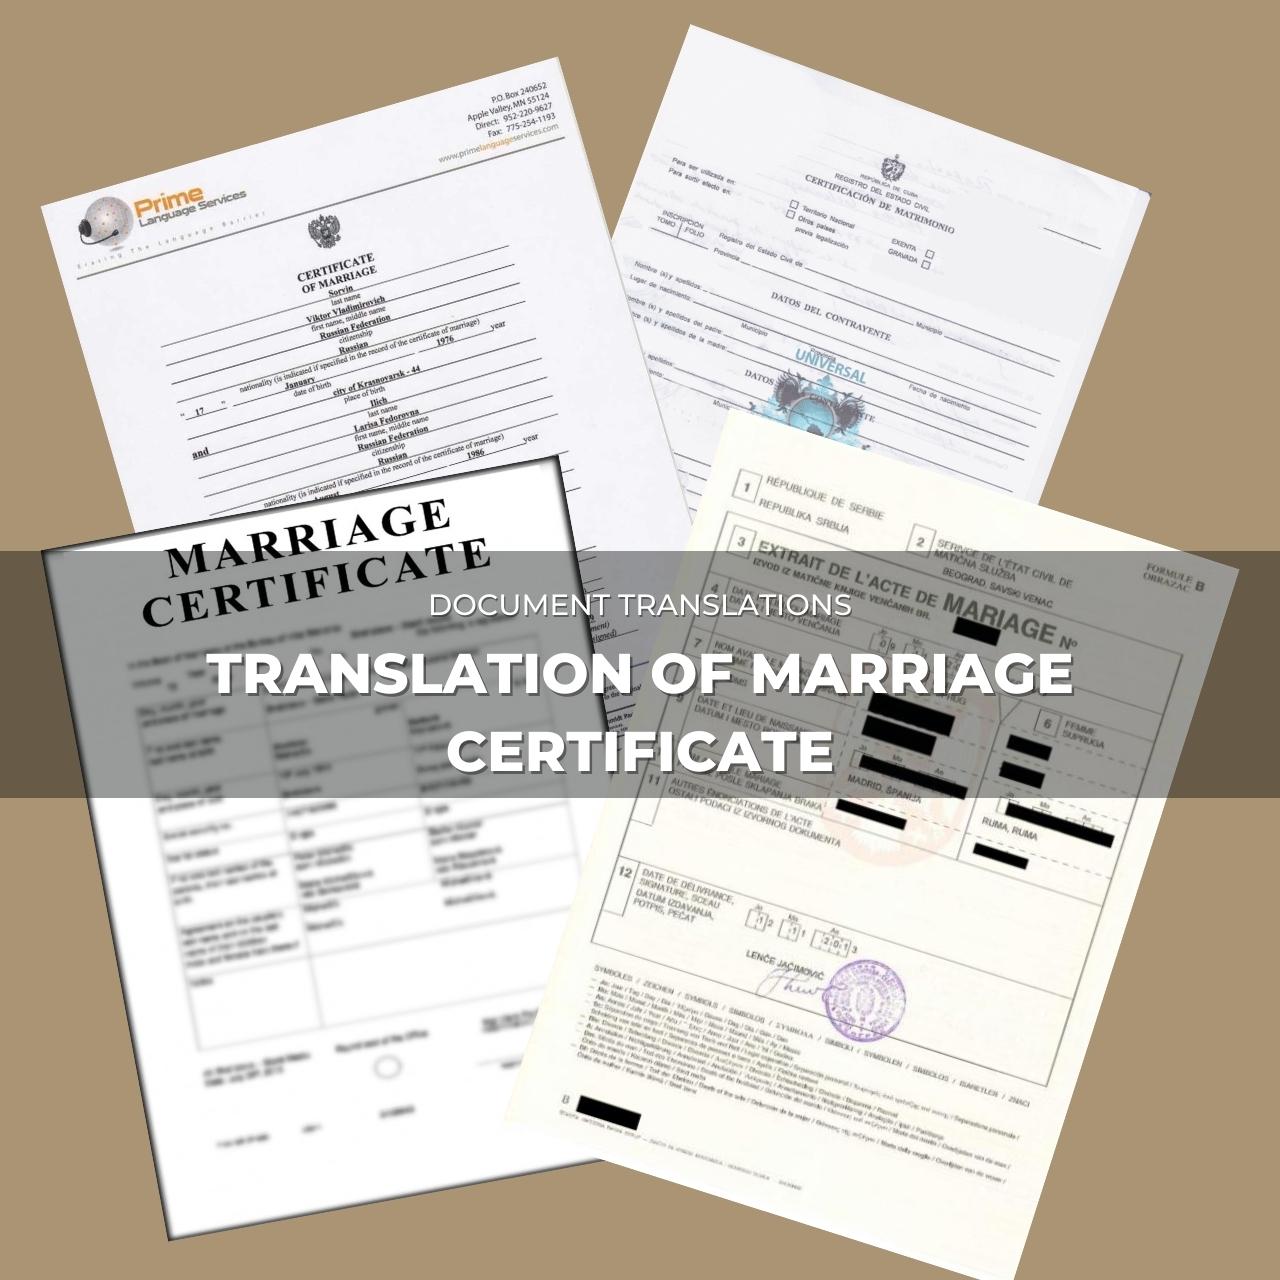 Translation of Marriage certificate